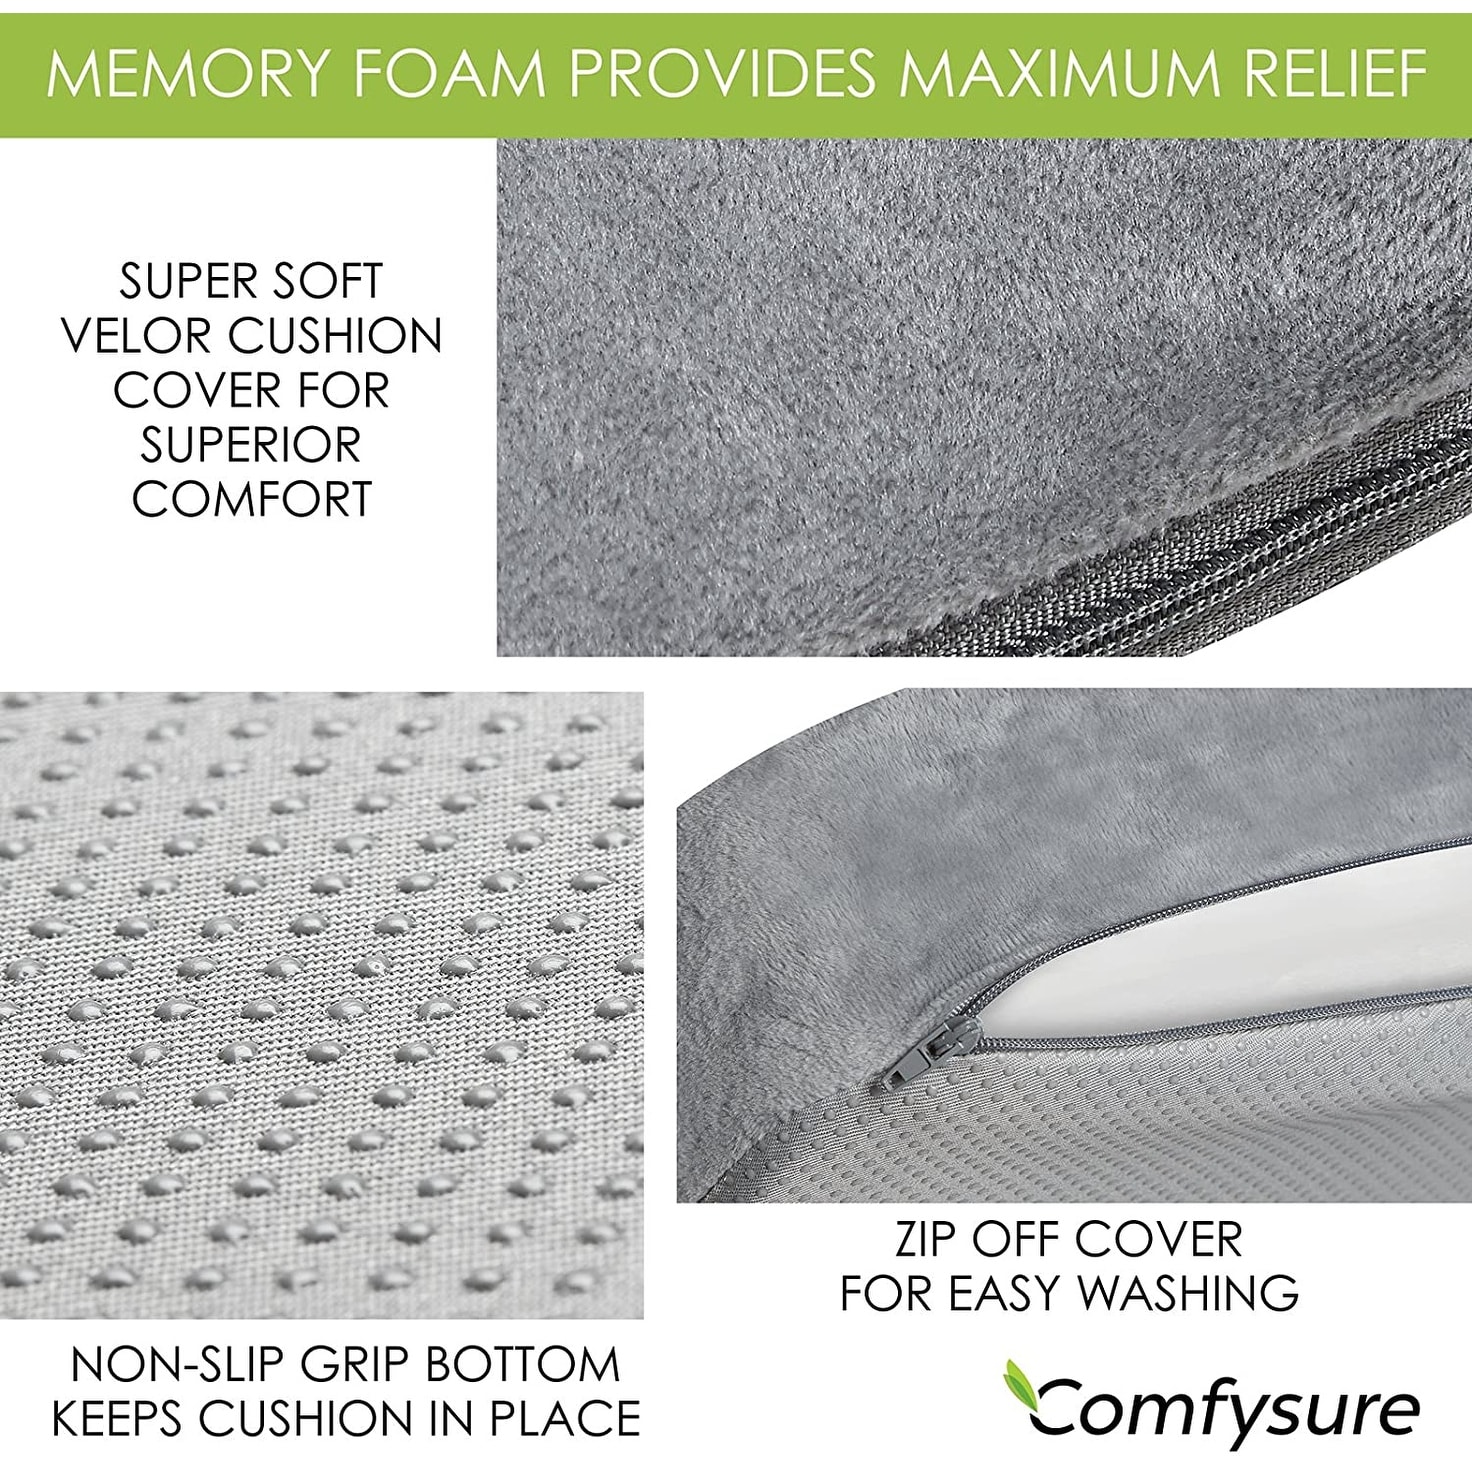 ComfySure Car Seat Wedge Pillow - Memory Foam Firm Cushion - Orthopedic  Support and Pain Relief for Lower Back, Tailbone, Coccyx and Hips for  Driving